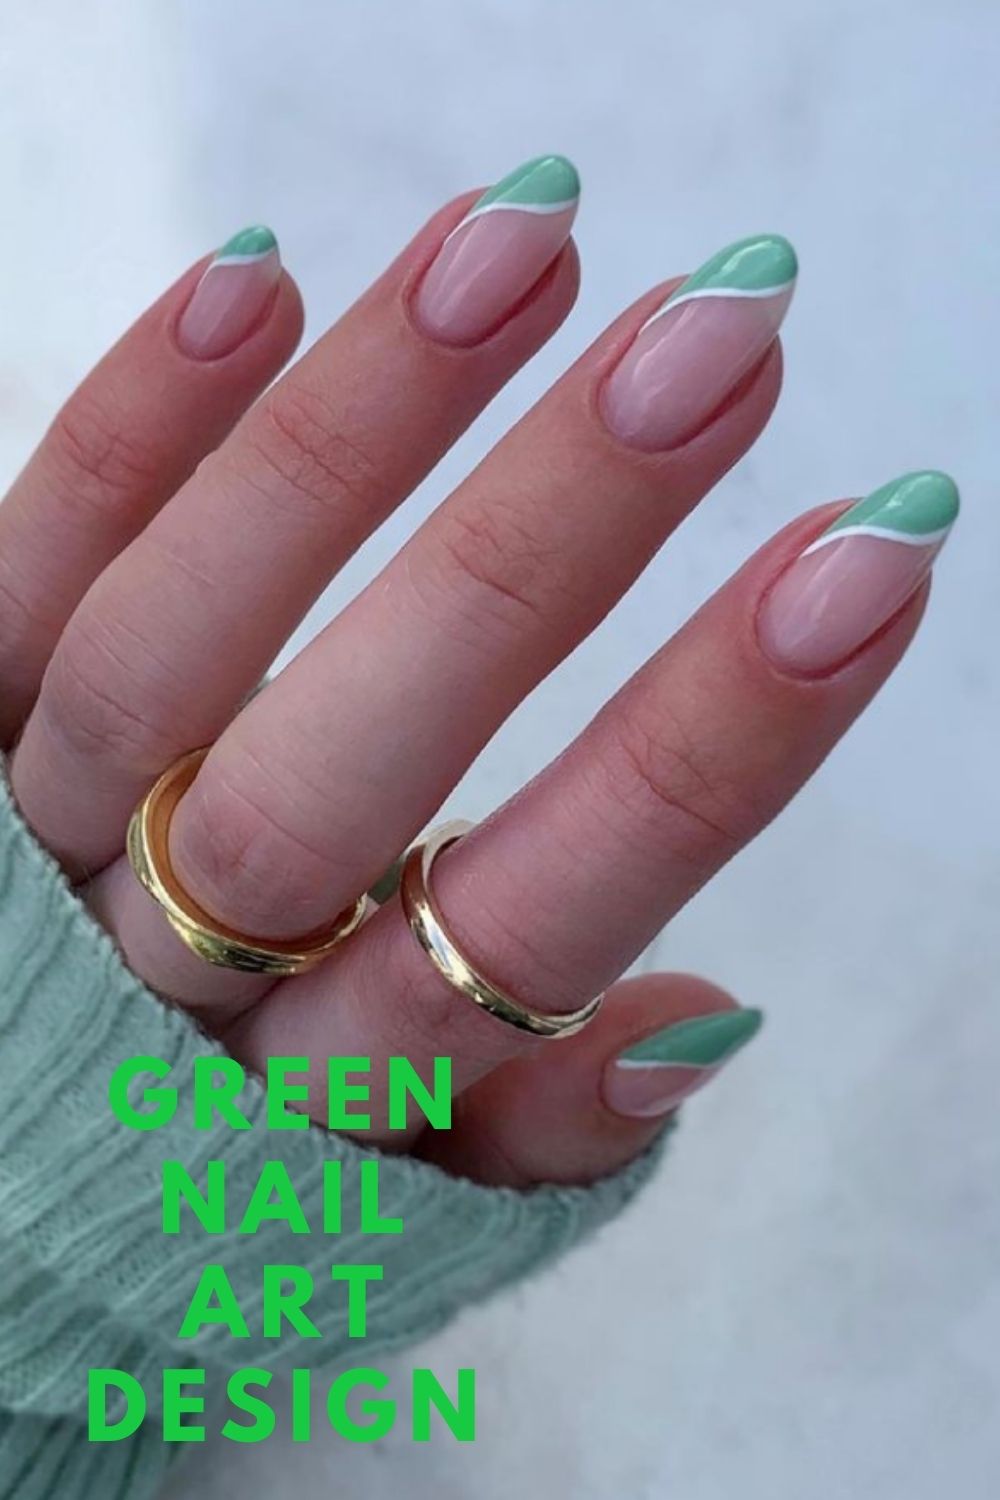 White and green almond nails